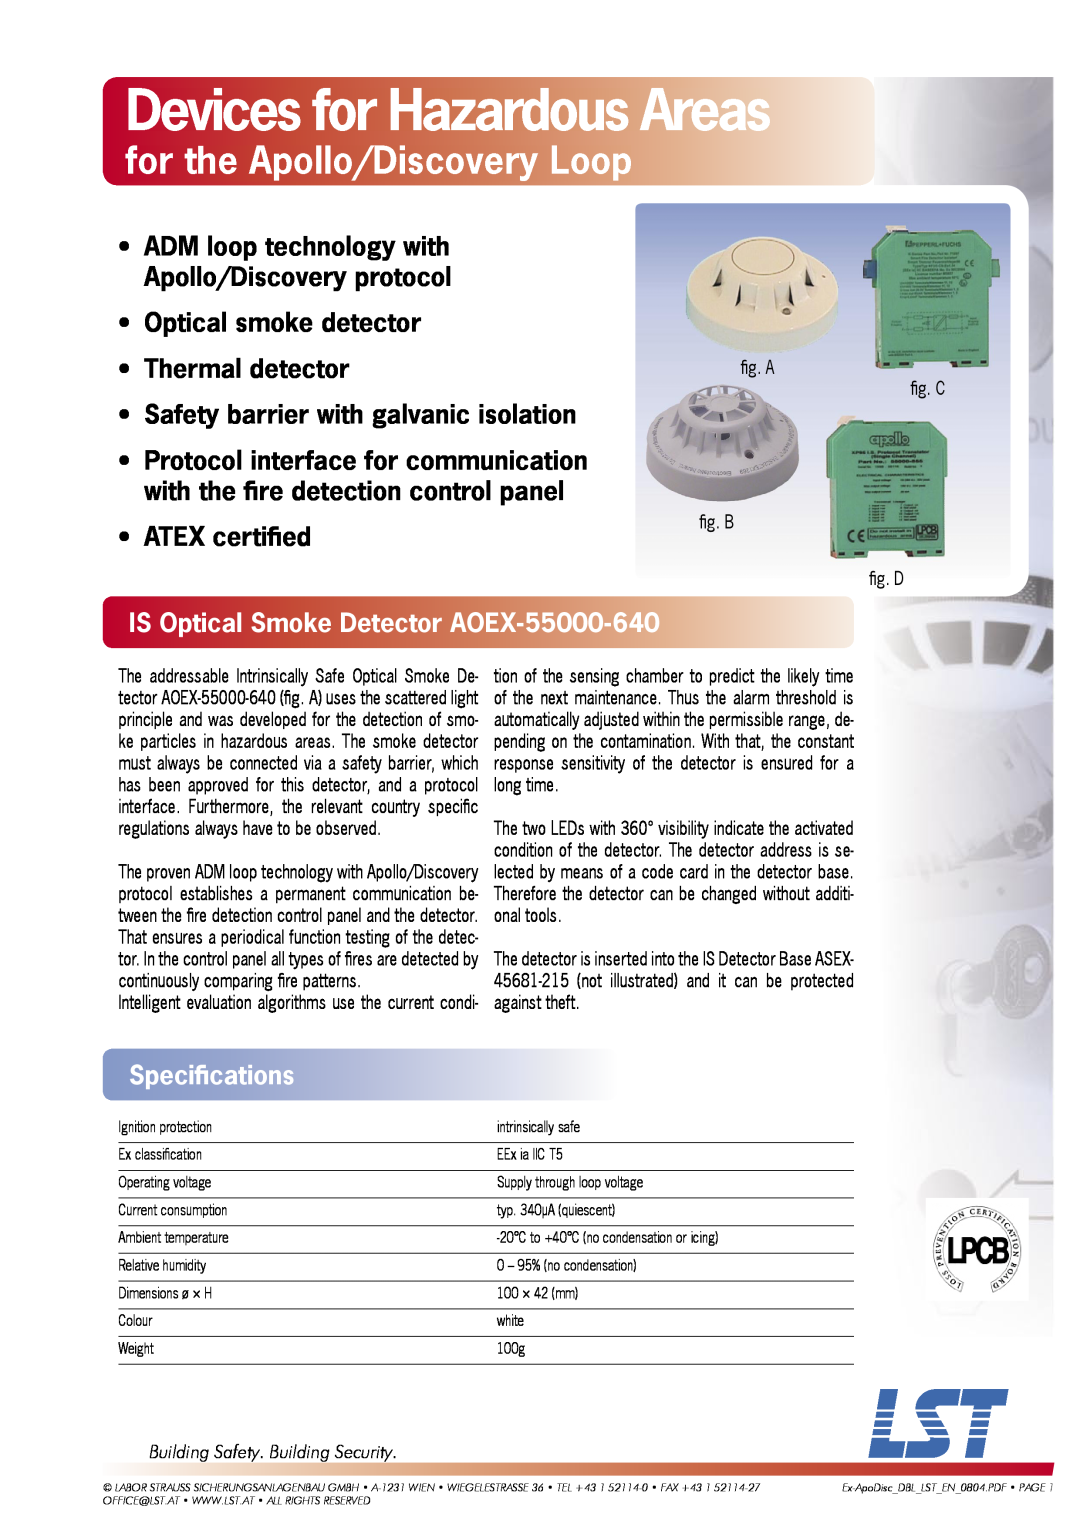 LST specifications IS Optical Smoke Detector AOEX-55000-640, Speciﬁcations, Devices for Hazardous Areas, ATEX certiﬁed 